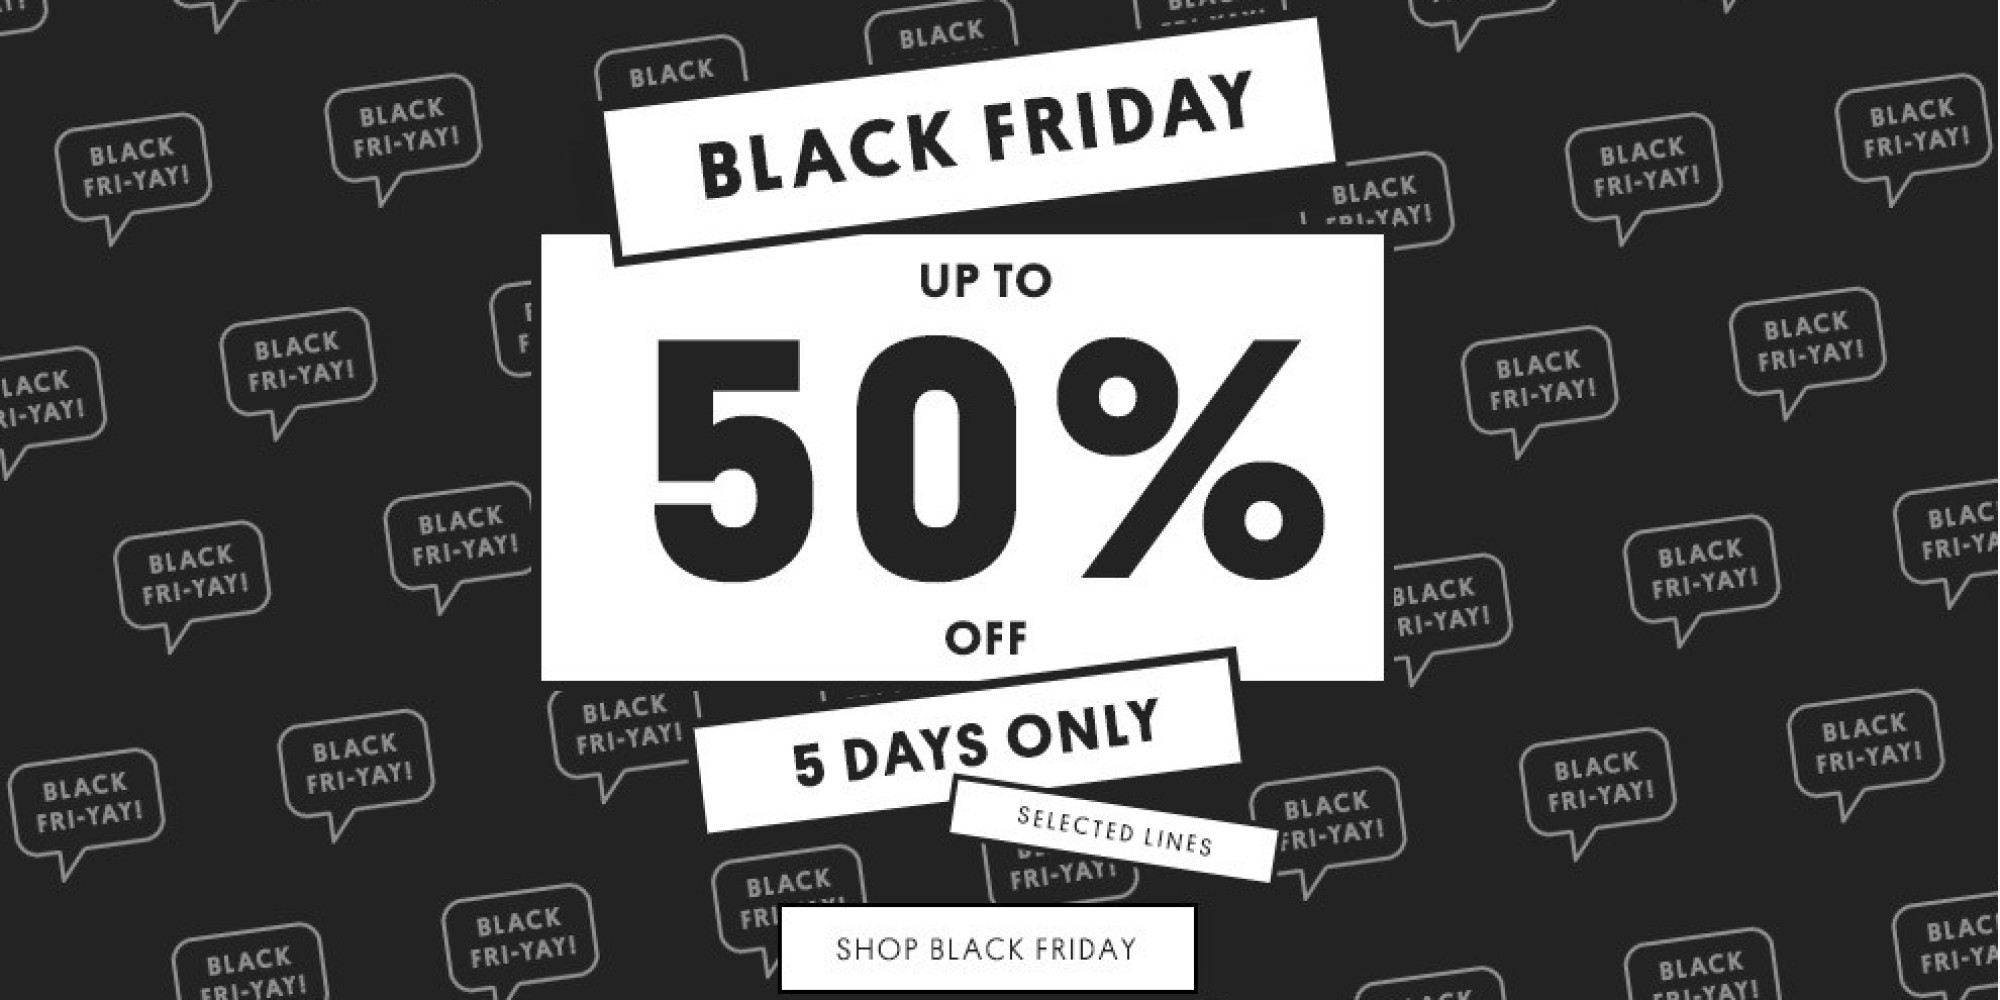 Black Friday Topshop Deals 2015: UK Opening Times And All The Best Sale Items | HuffPost UK